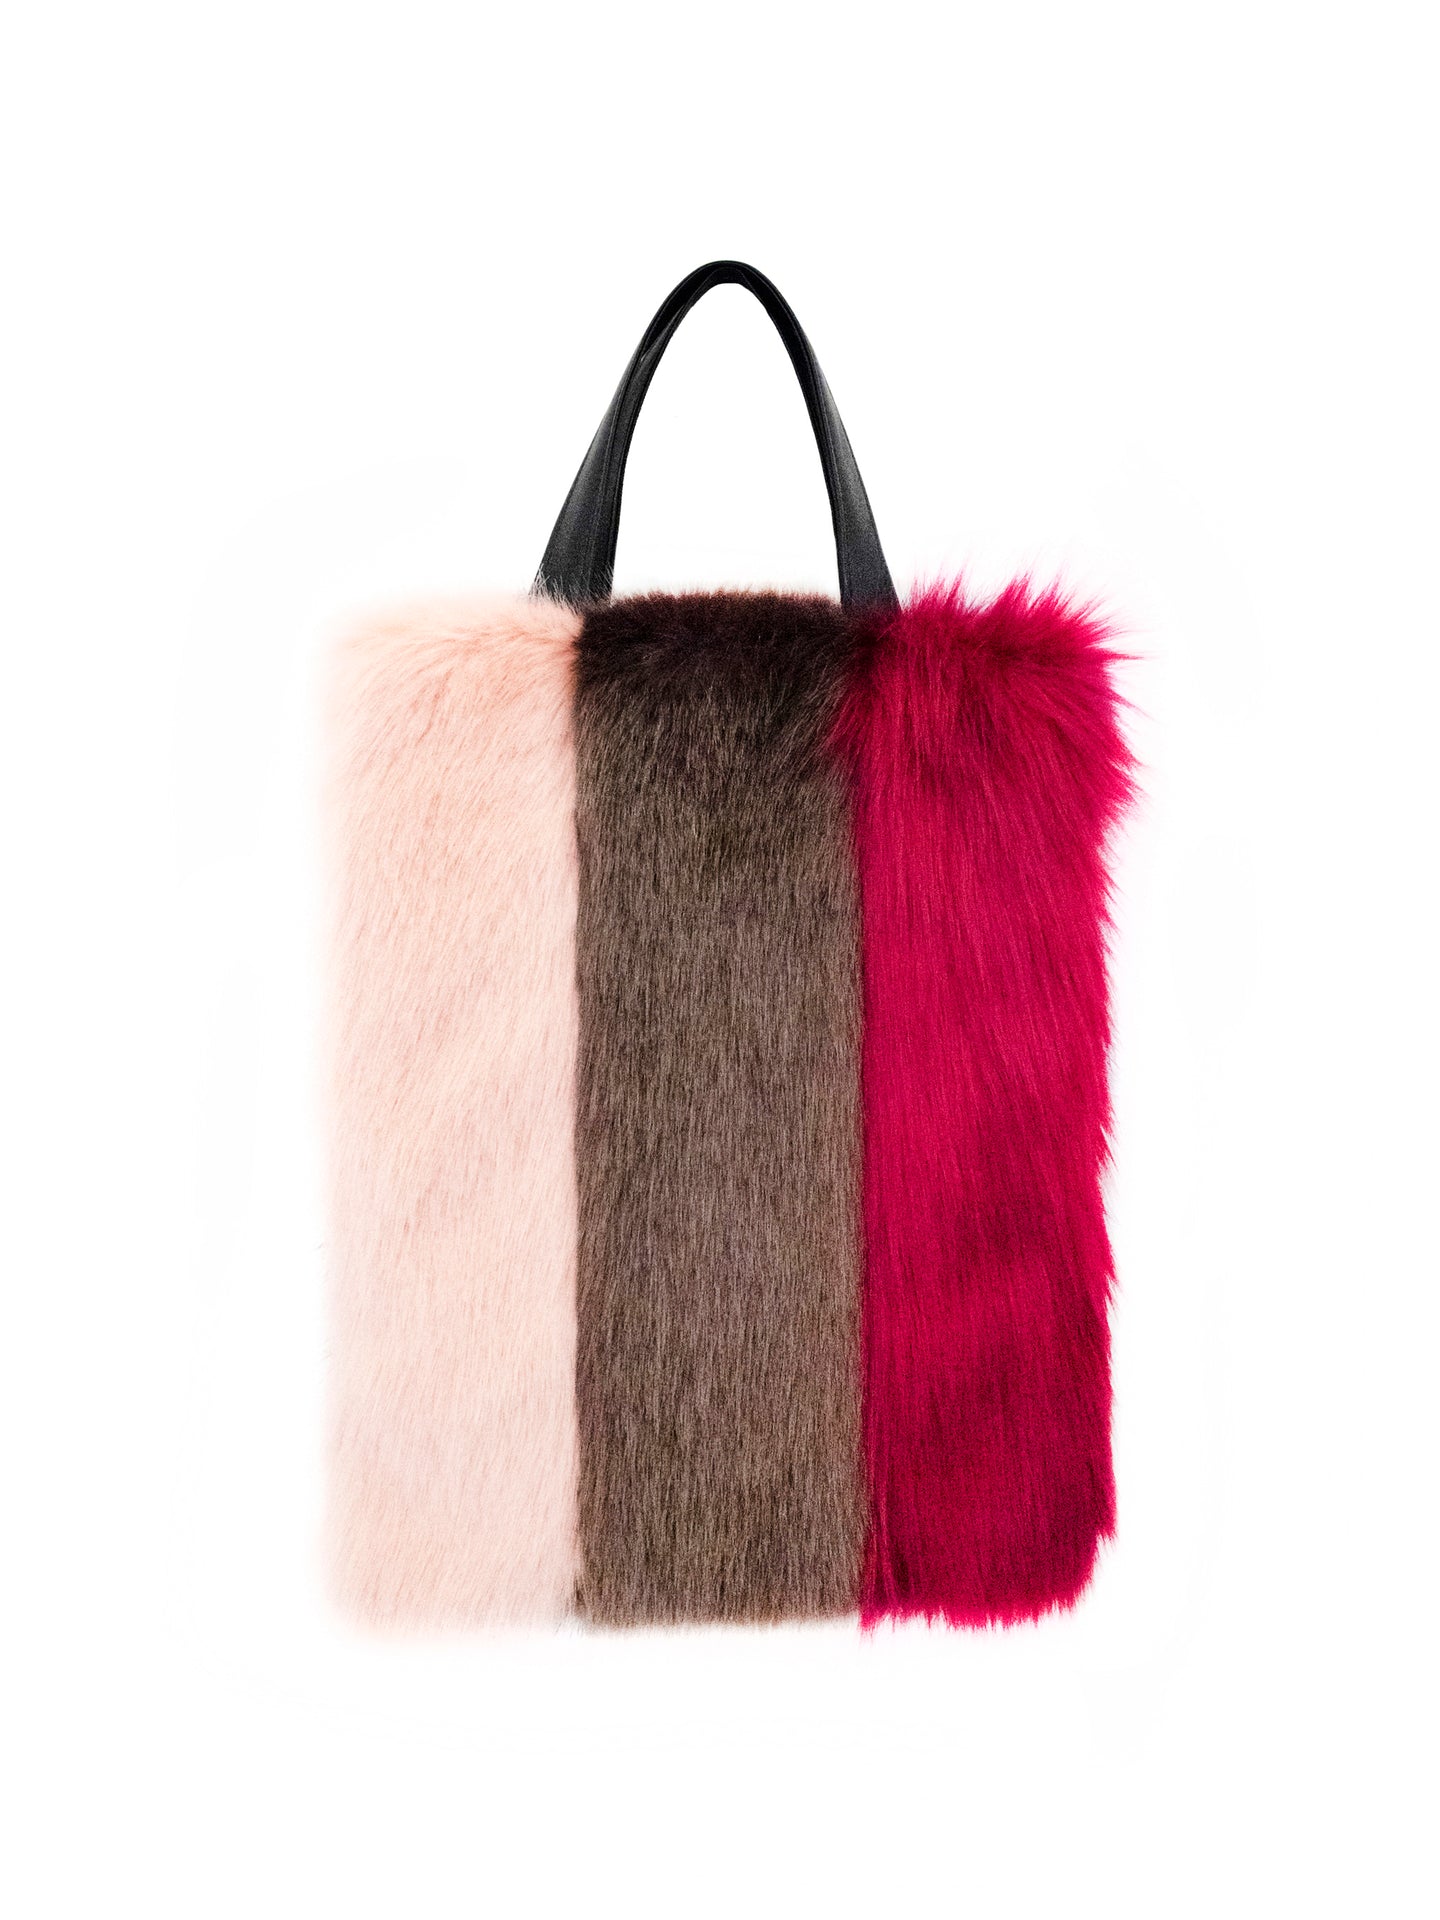 How to sew the trendy Faux Fur Tote Bag - Balenciaga inspired - YouTube